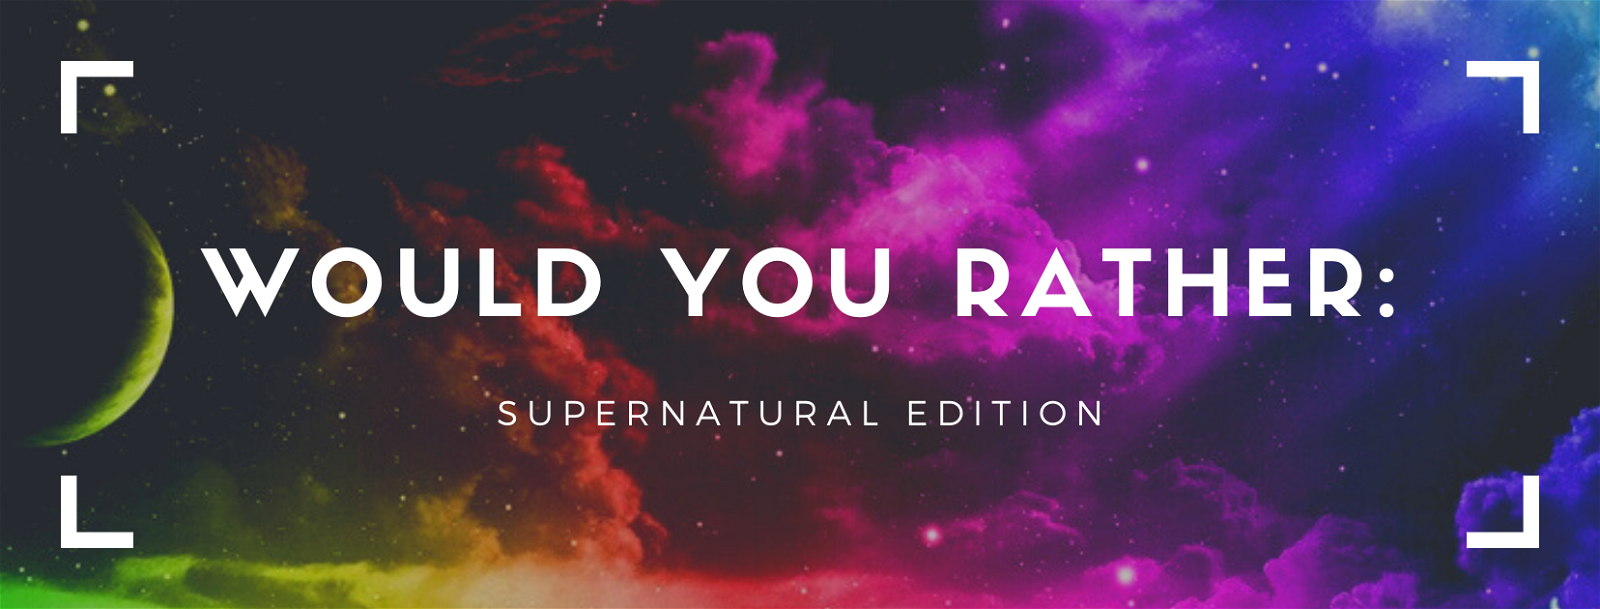 Would You Rather? (Supernatural Edition)